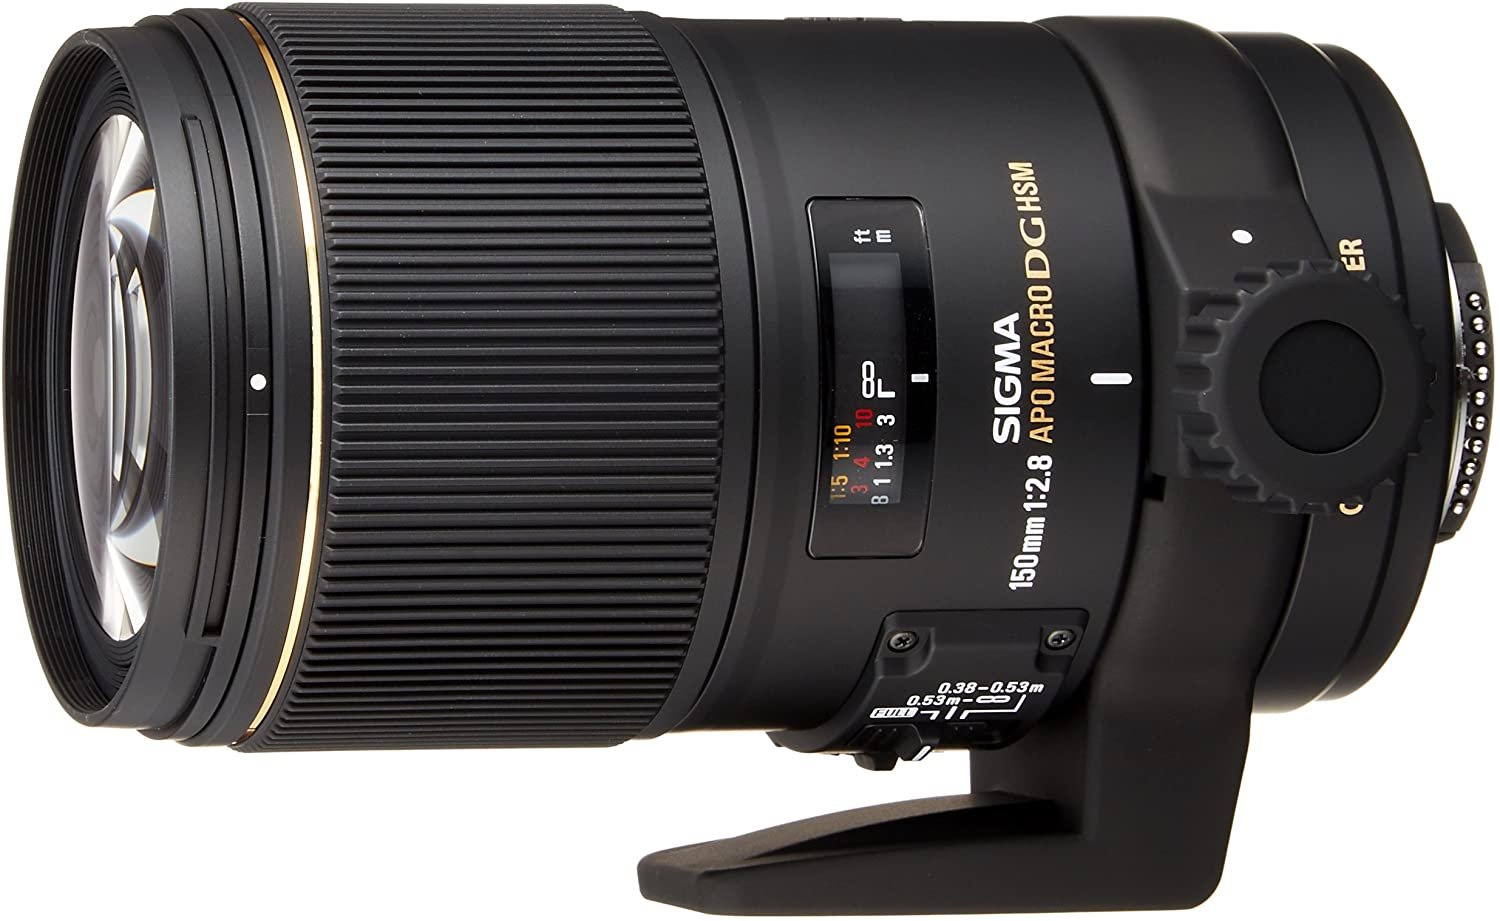 A picture of a Sigma APO MACRO 150mm f/2.8 EX DG OS HSM macro lens